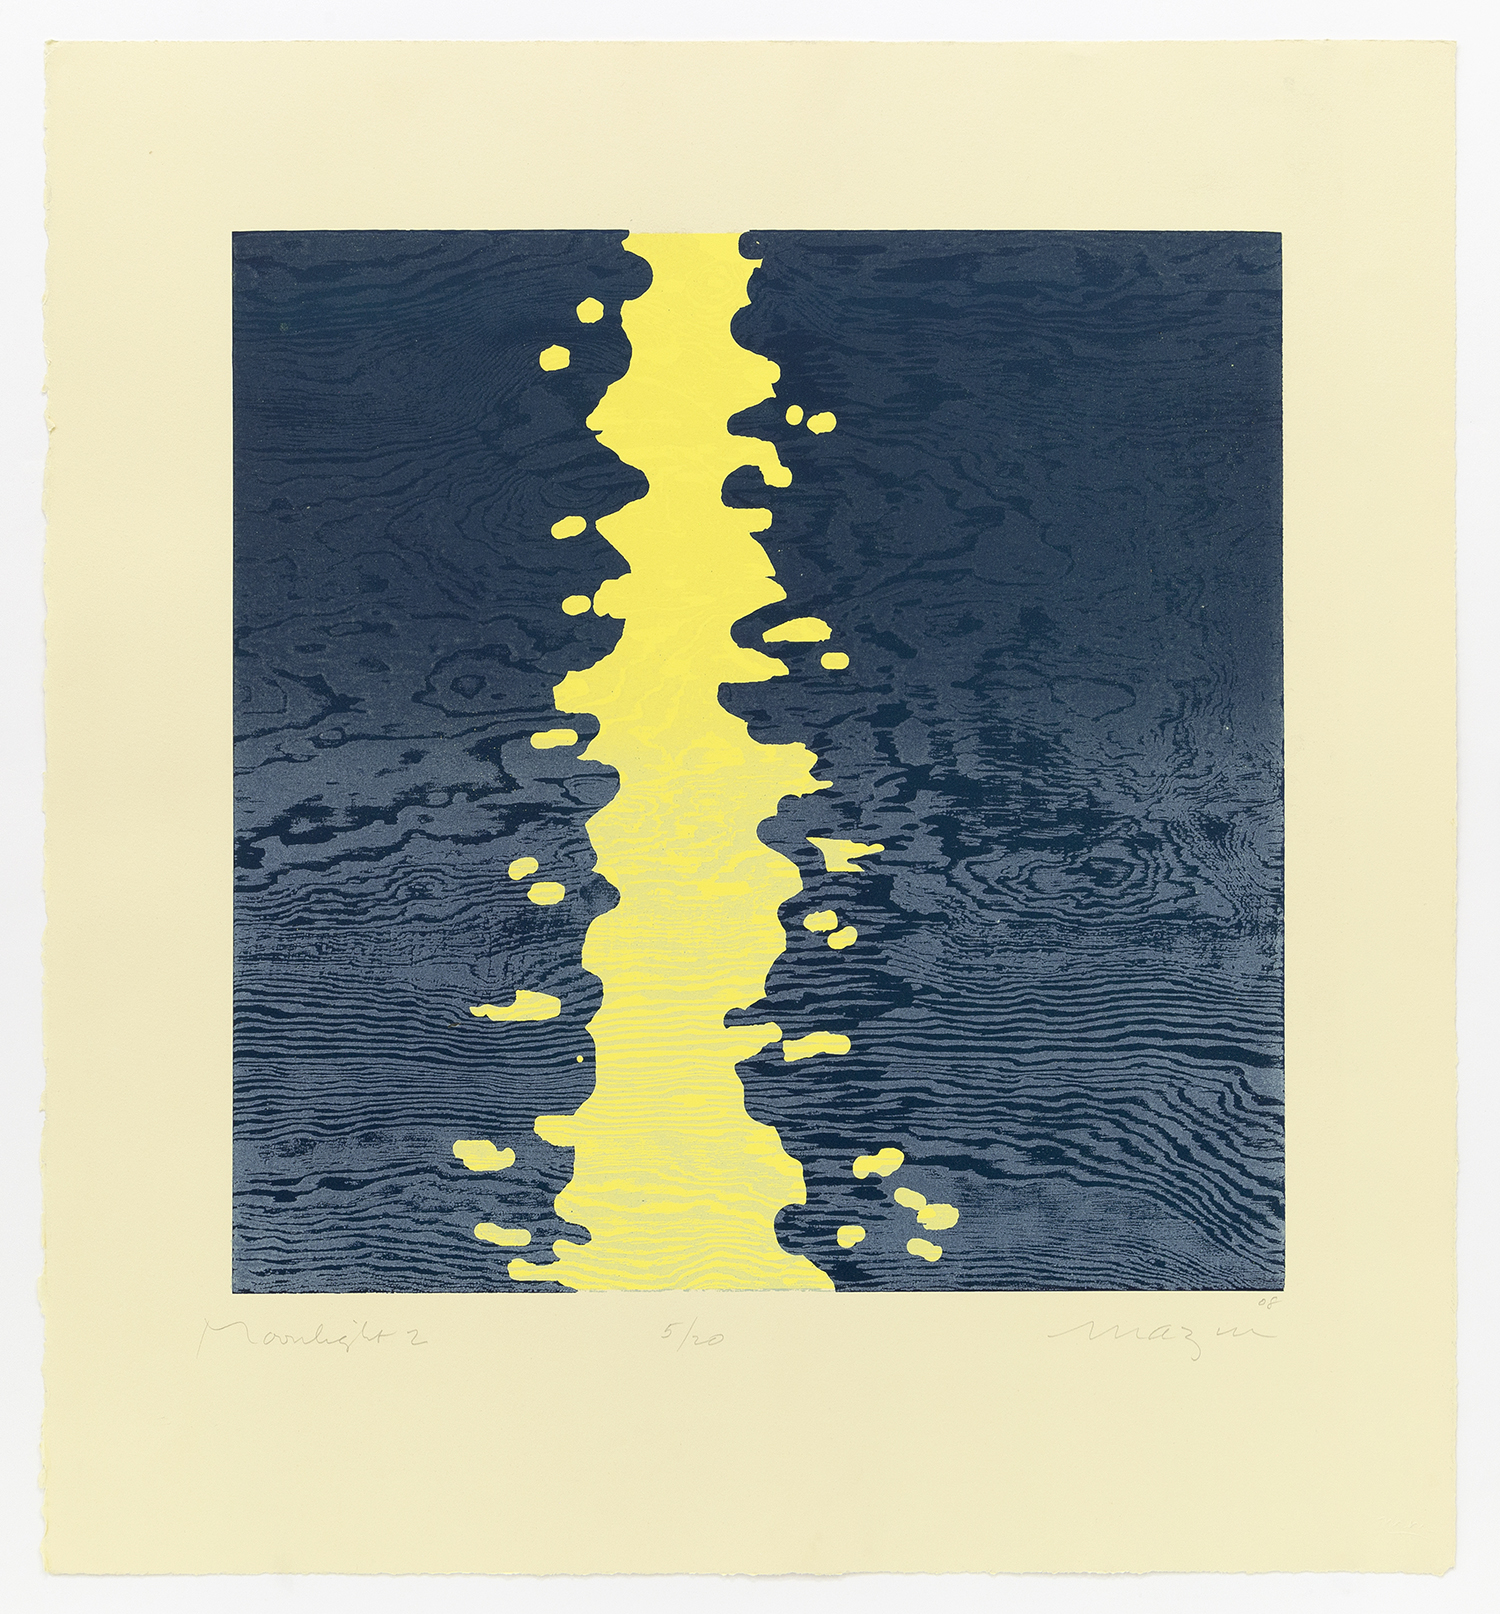 Moonlight 2, 2007, Woodcut, 26 x 24 inches (66 x 60 cm), Edition of 20